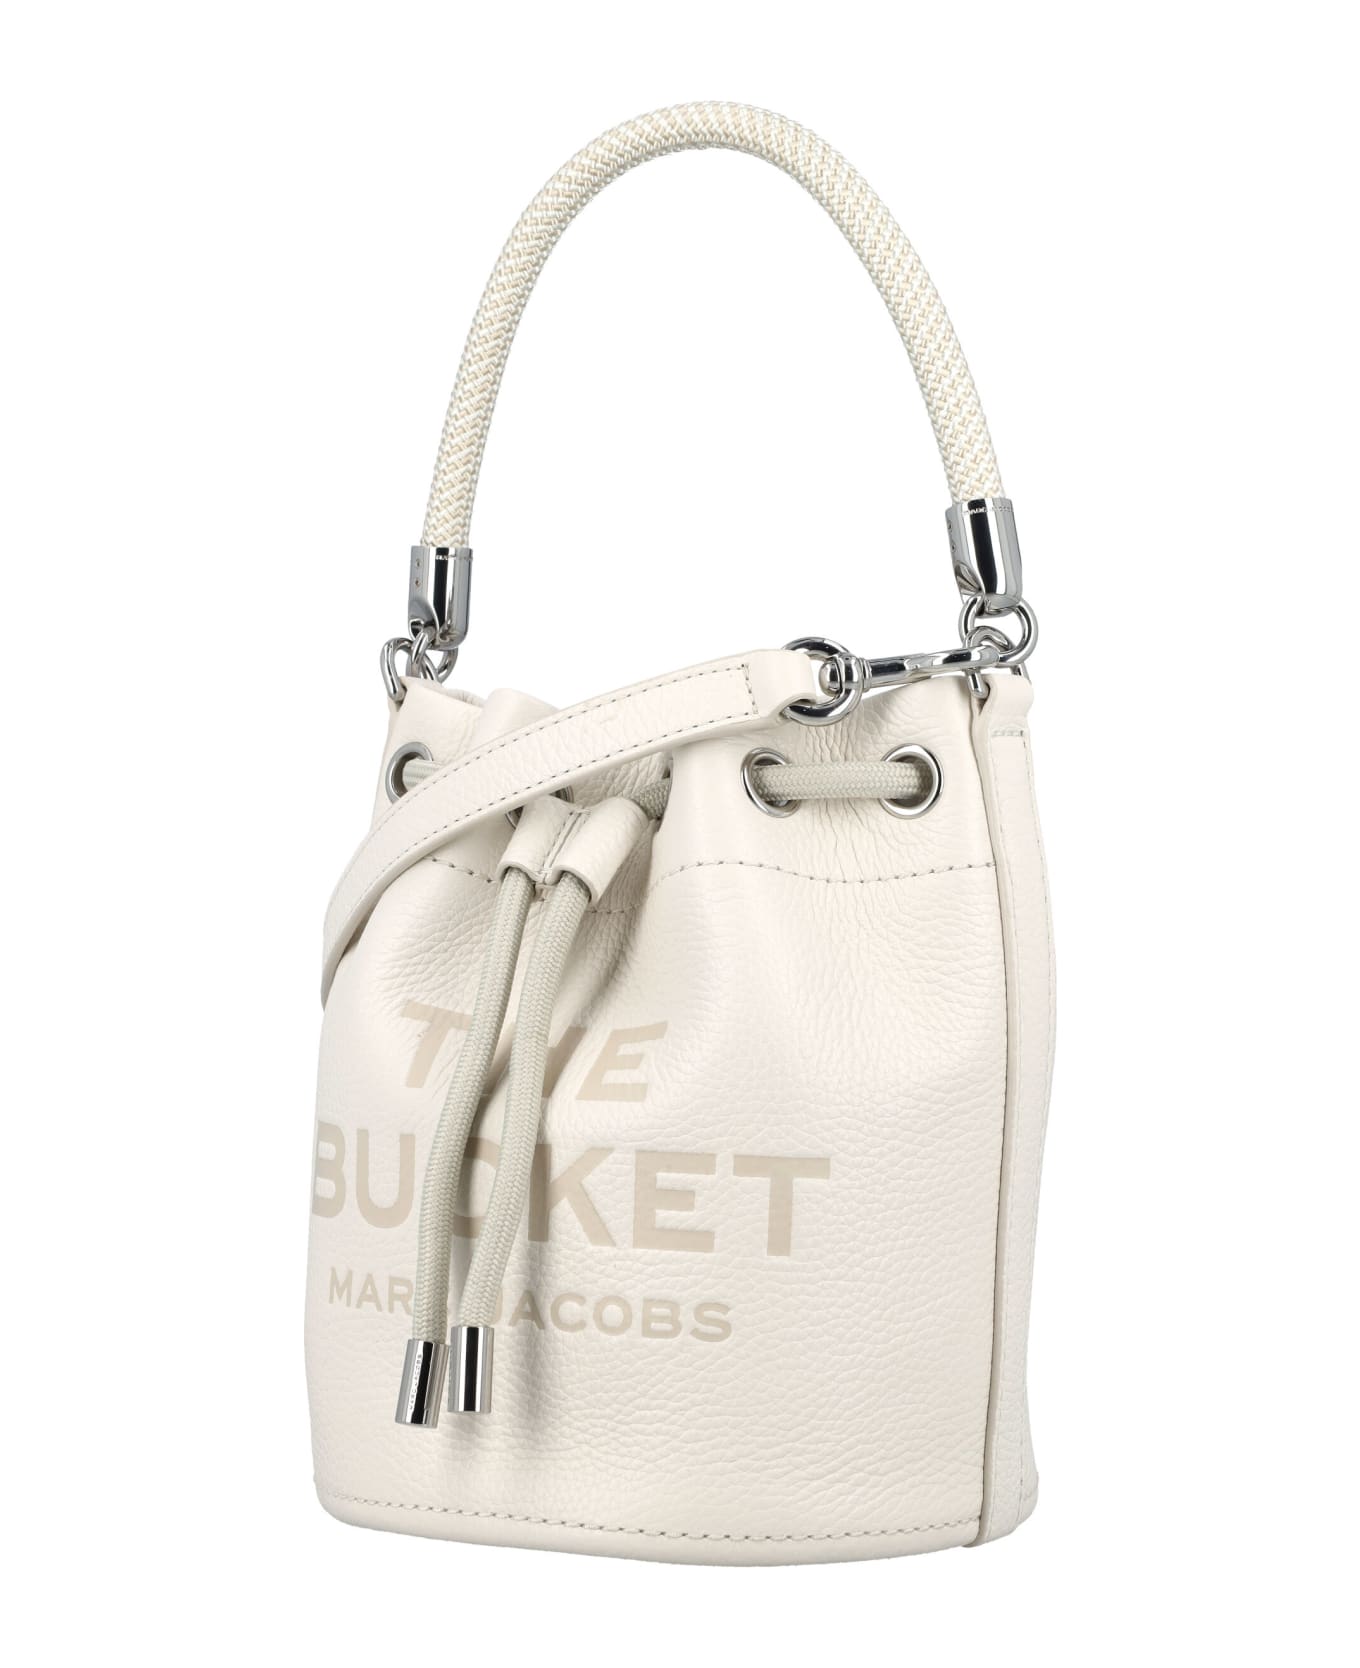 Marc Jacobs The Bucket Bag - COTTON SILVER